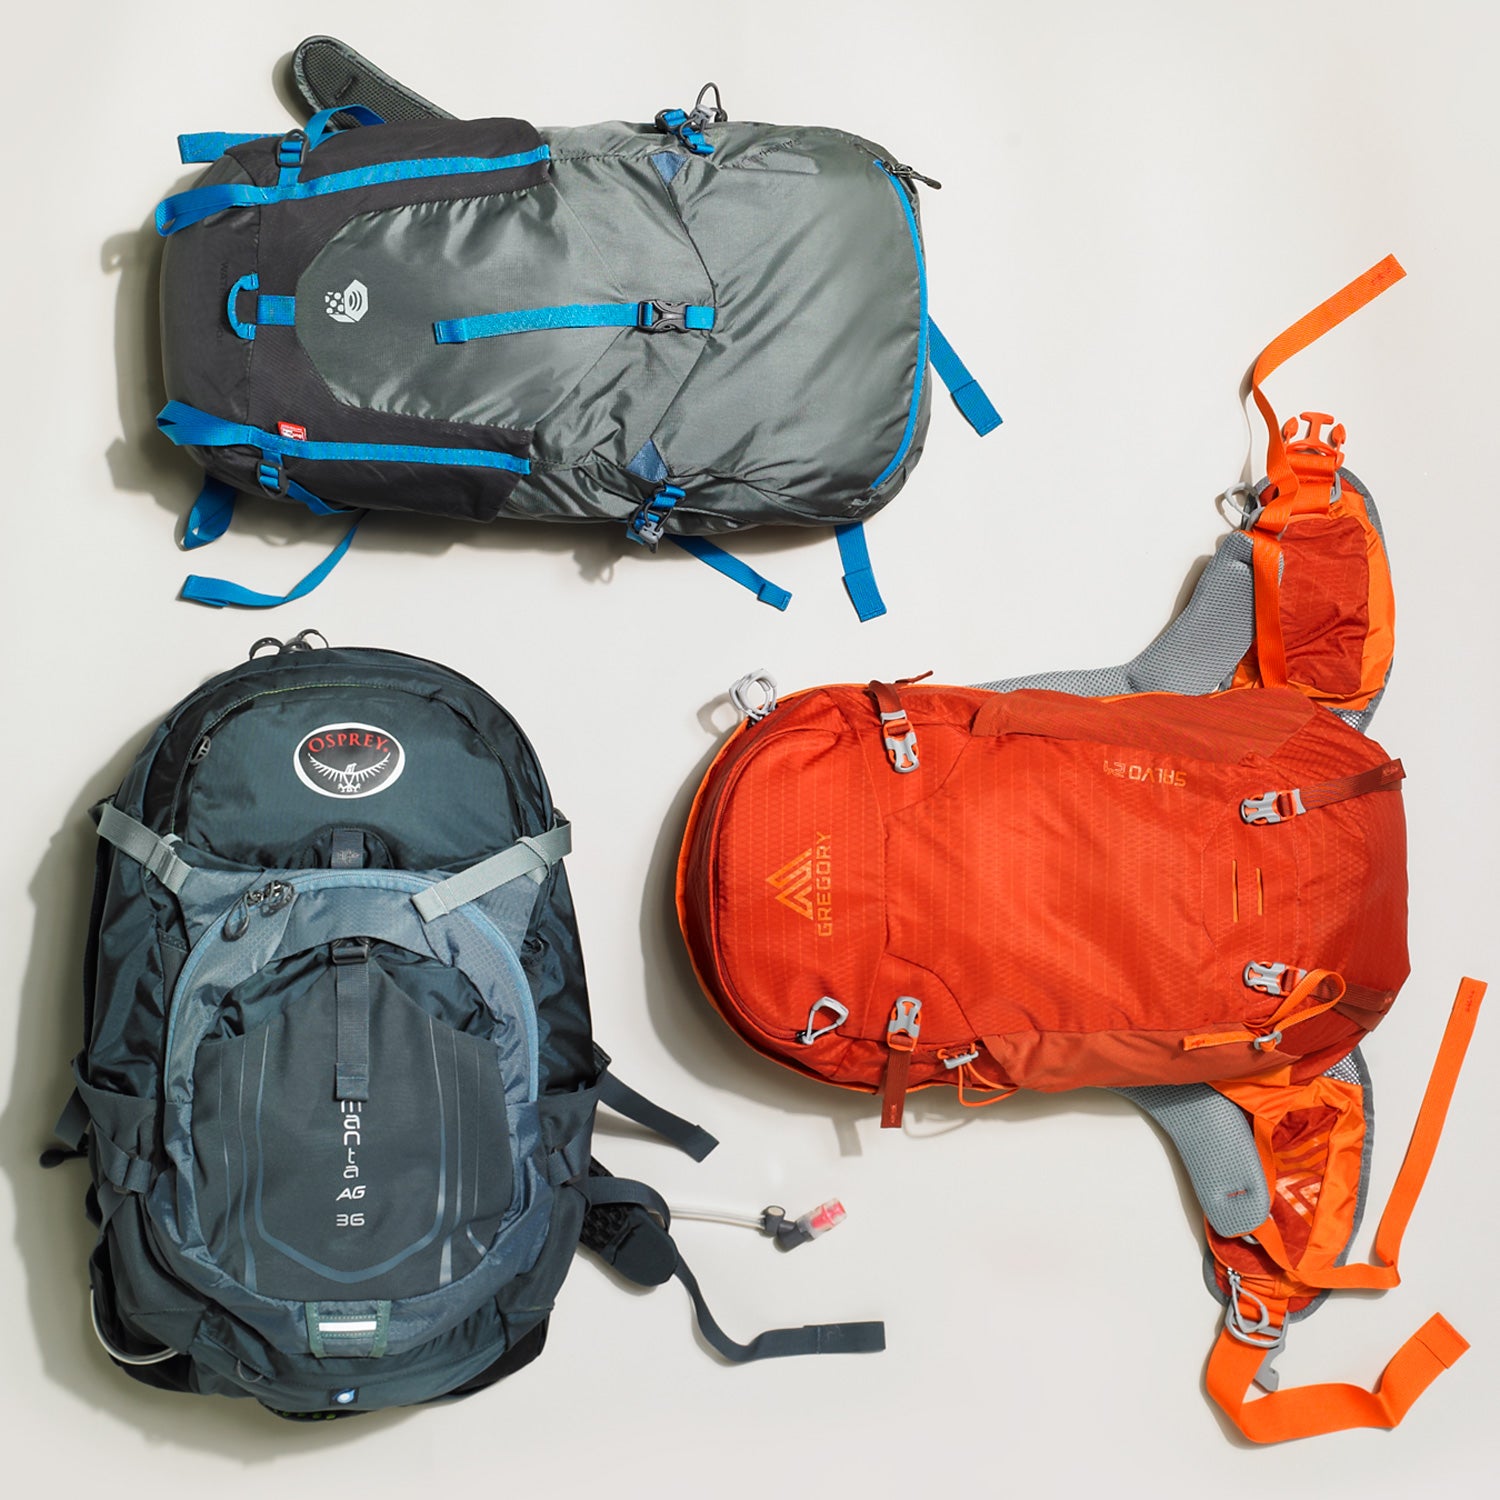 Tech on the Trail: Silicon Valley's Favorite Smart Hiking Gear